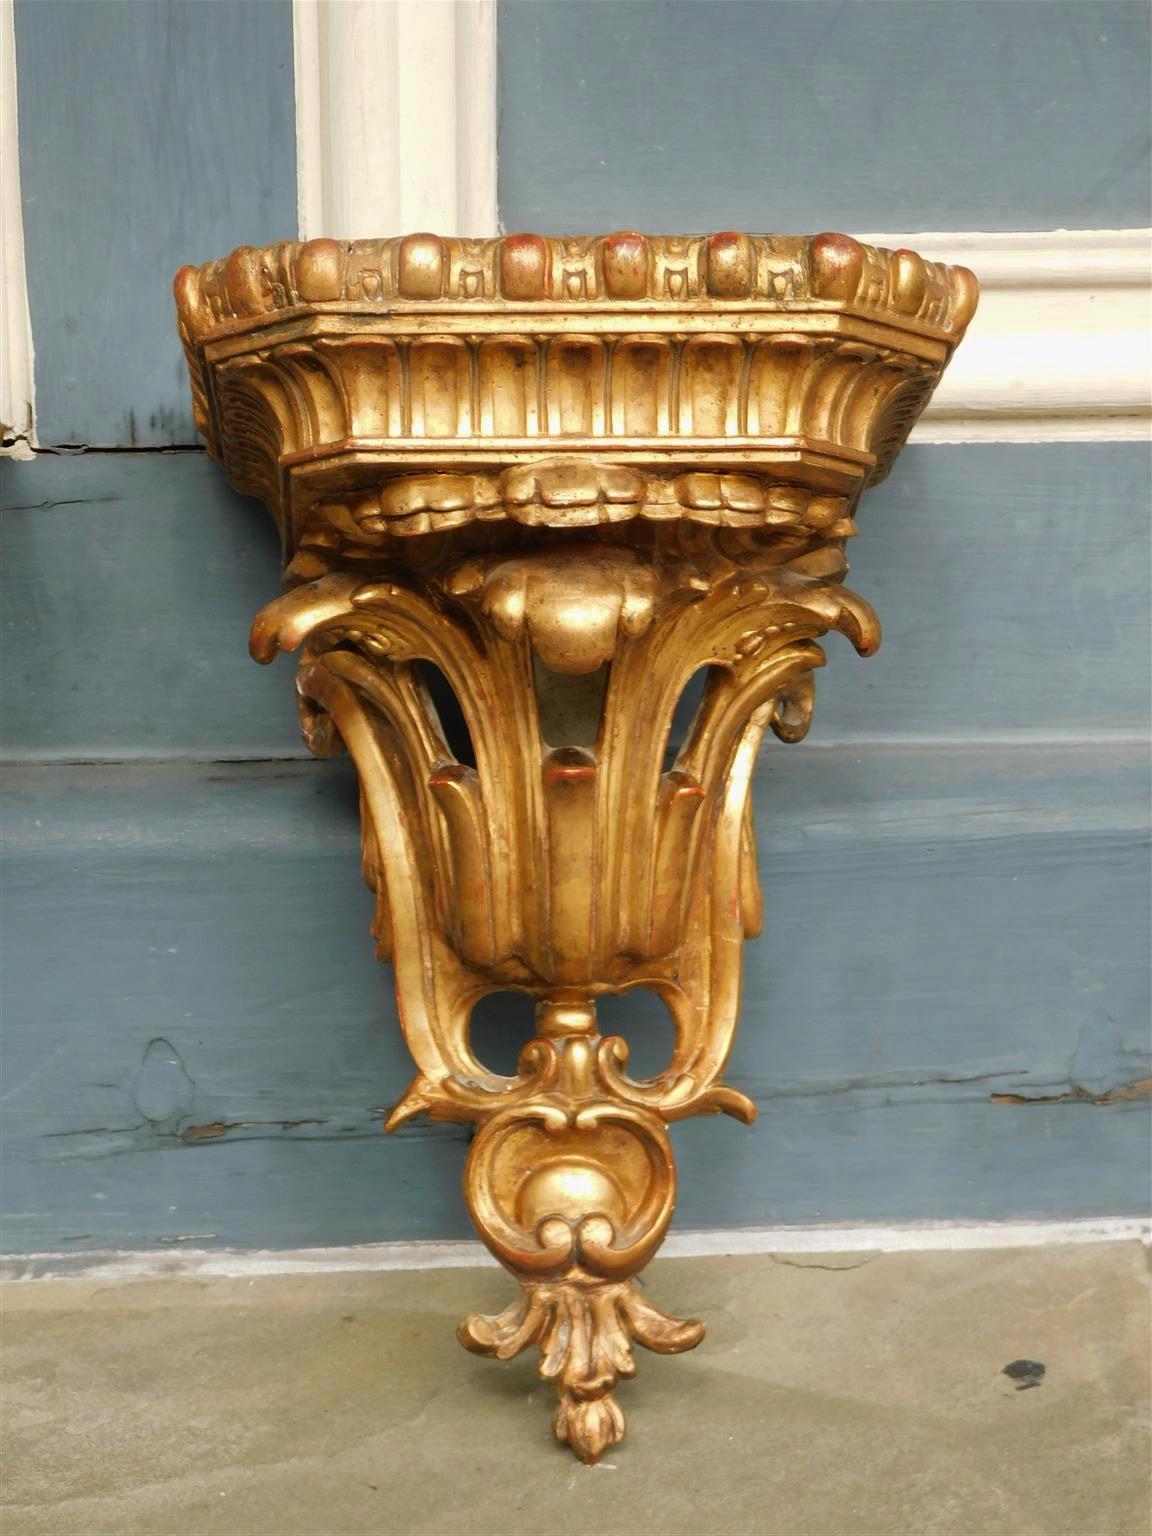 Pair of French Gilt Carved Wood & Gesso Foliage Gadrooned Wall Brackets, C. 1820 In Excellent Condition For Sale In Hollywood, SC